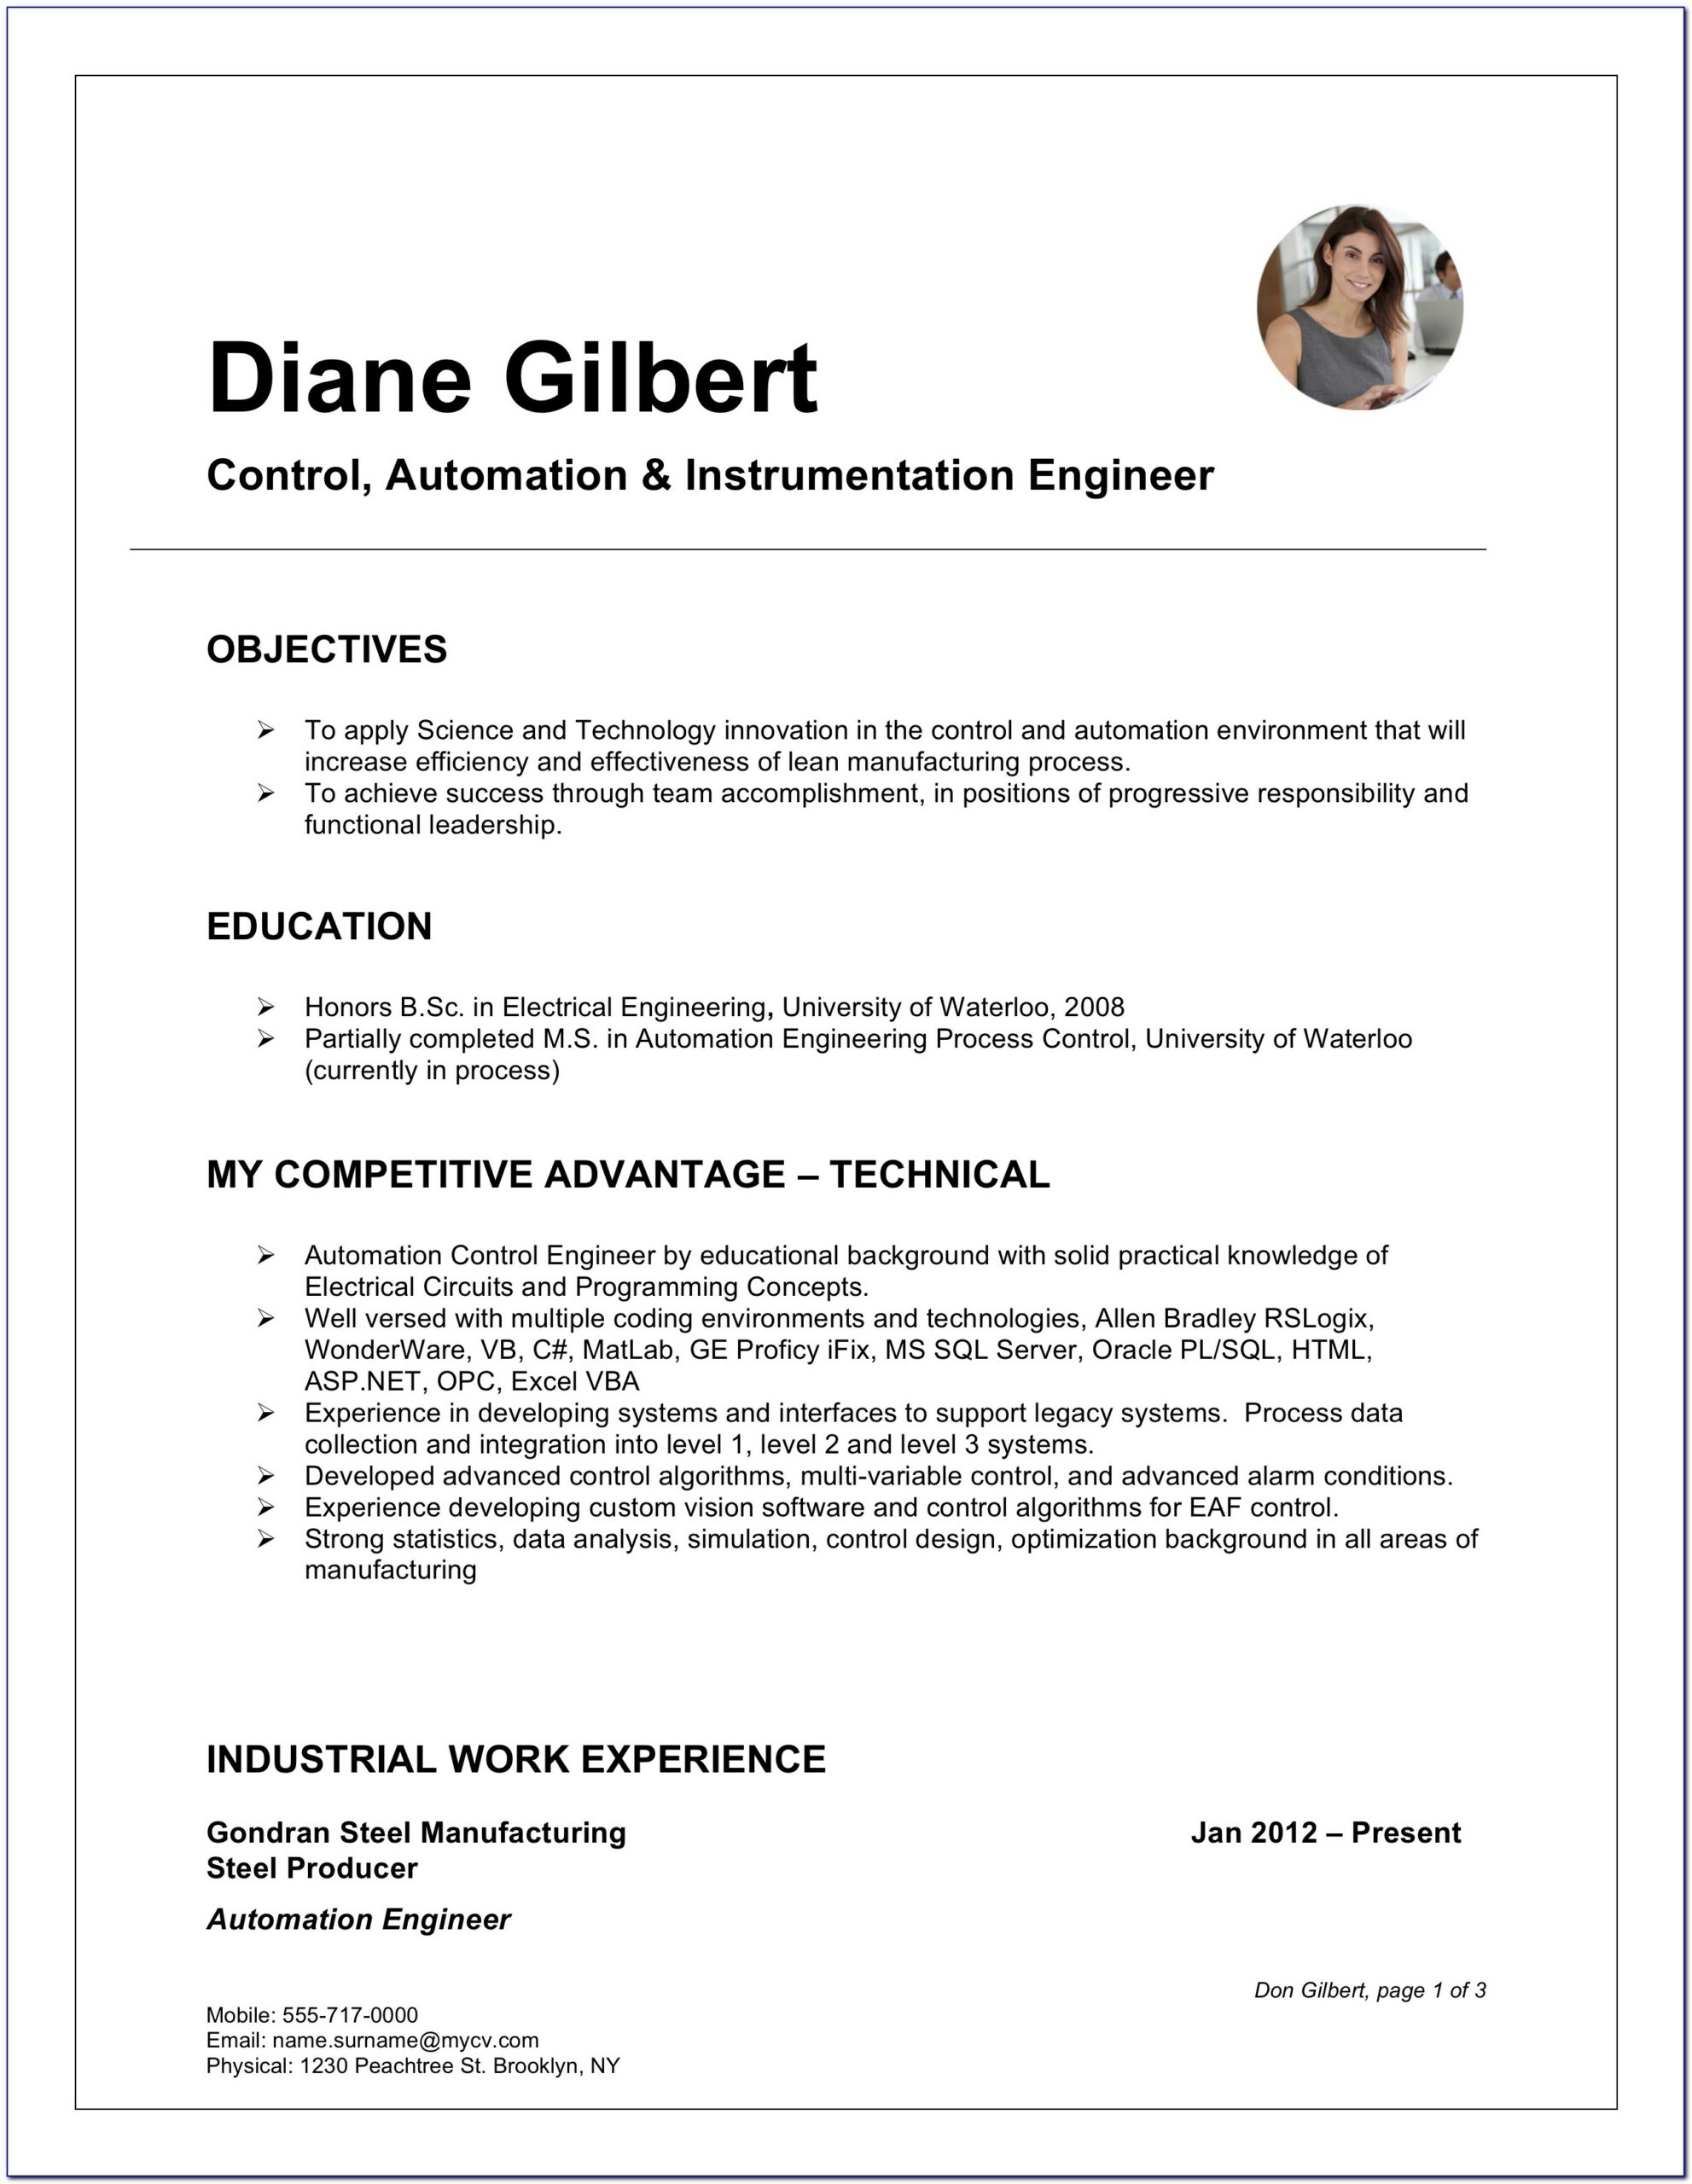 Resume Format Free Download In Ms Word 2016